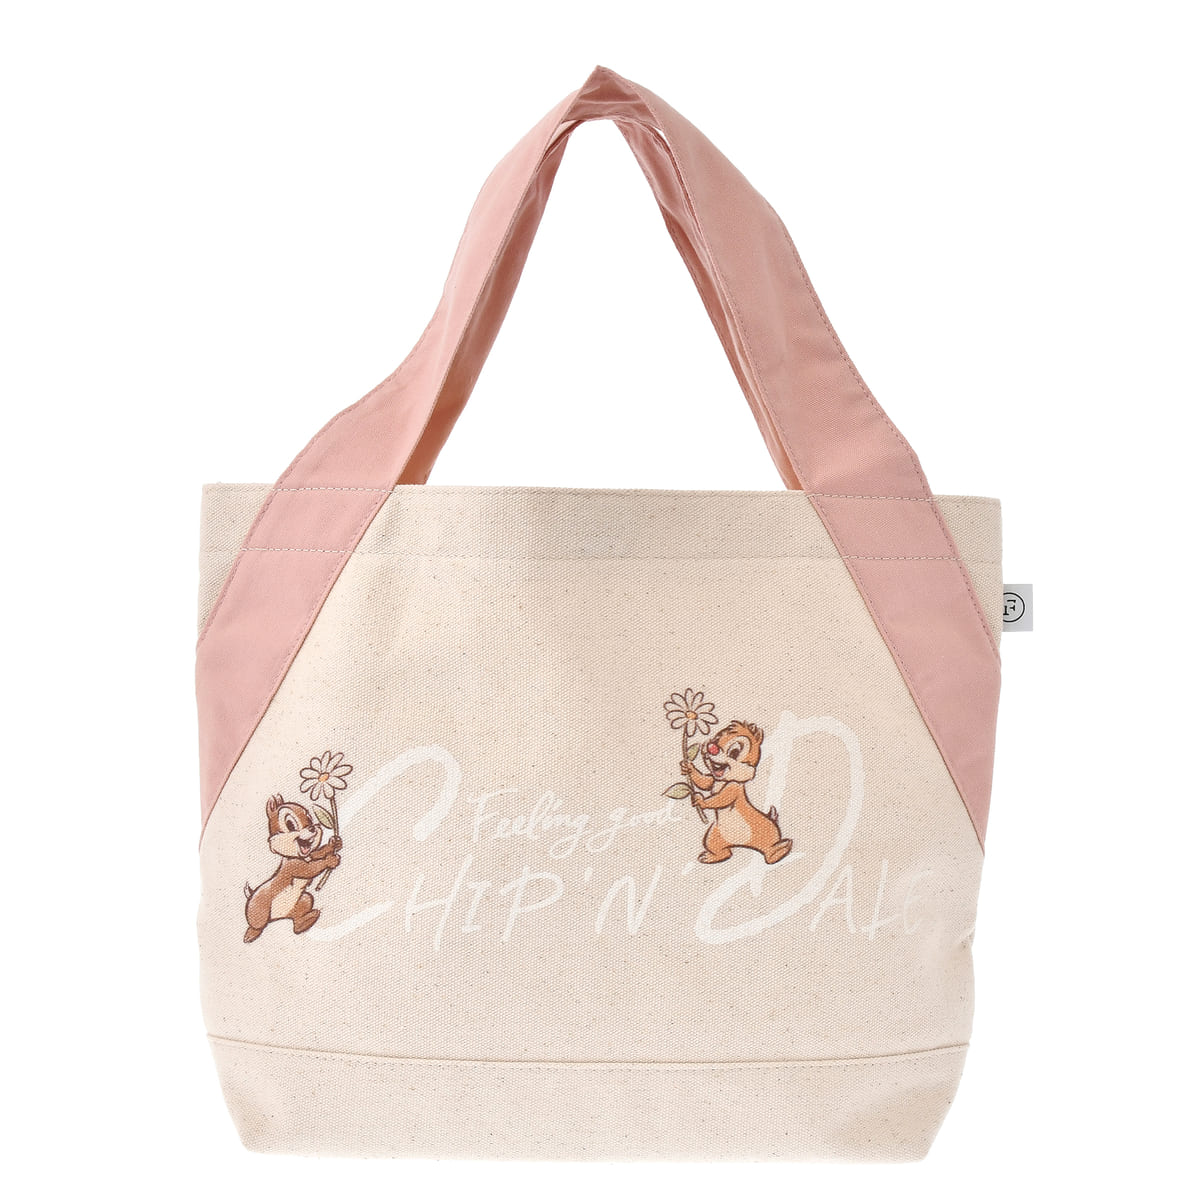 【FOOD TEXTILE】チップ＆デール ランチバッグ ピンク Chip＆Dale FOOD TEXTILE